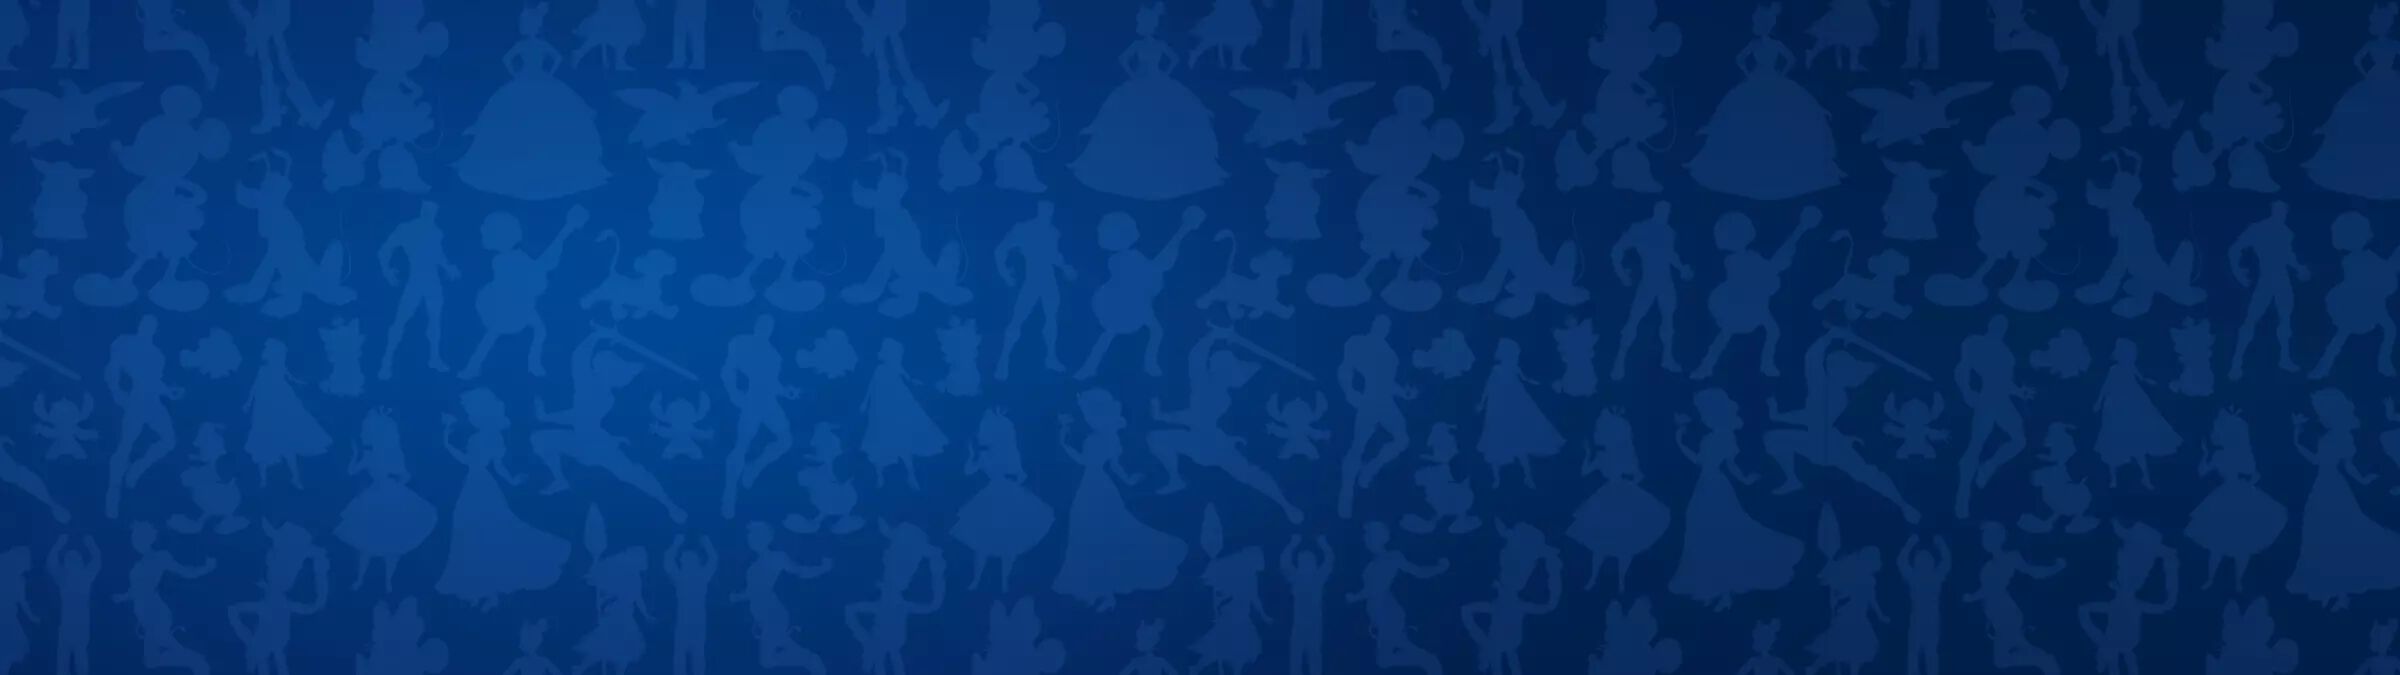 Blue background featuring silhouettes of Disney characters